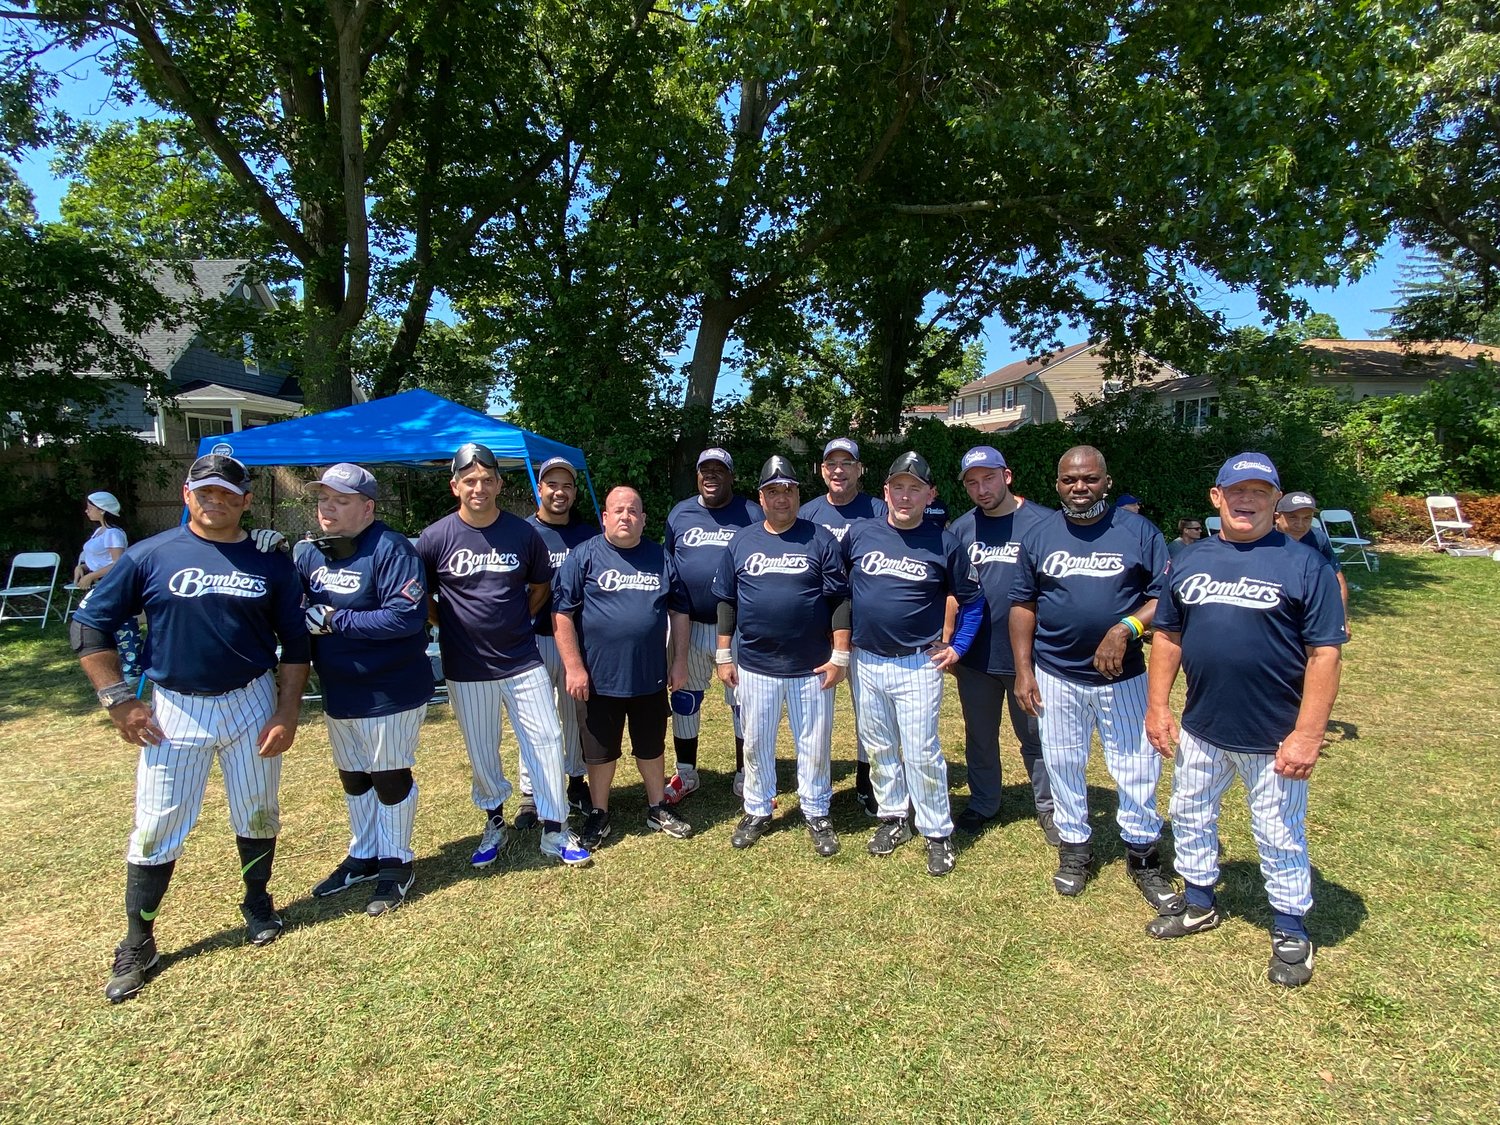 The Long Island Bombers competed against three other teams with blind or visually impaired players at Speno Memorial Park in East Meadow last Saturday.